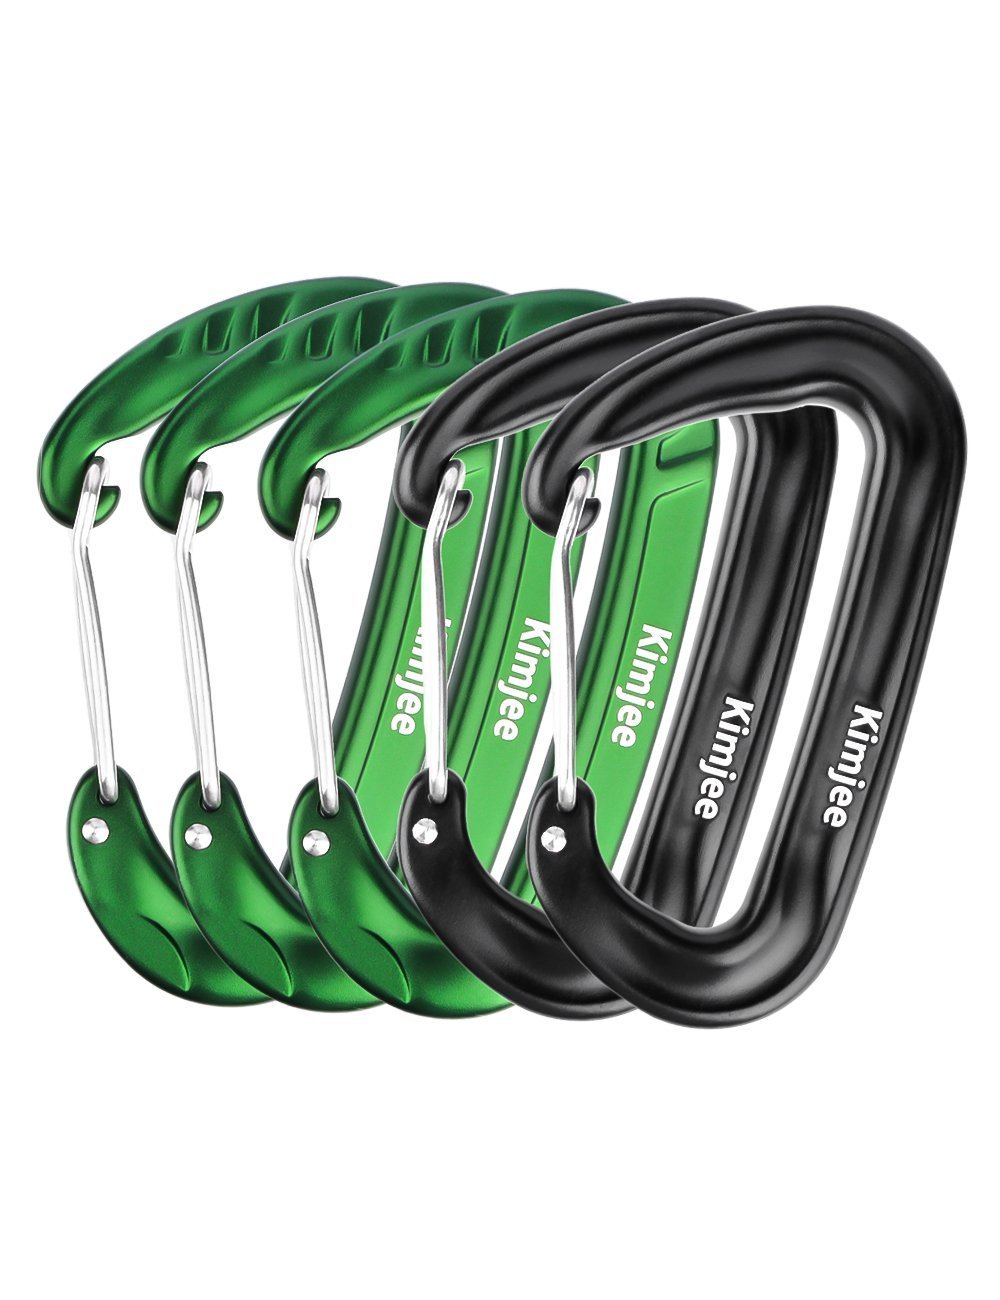 Budget kimjee 12kn wire gate carabiners d shape aircraft grade aluminum clip for keychain hammocks camping hiking backpack dog leash green black 5